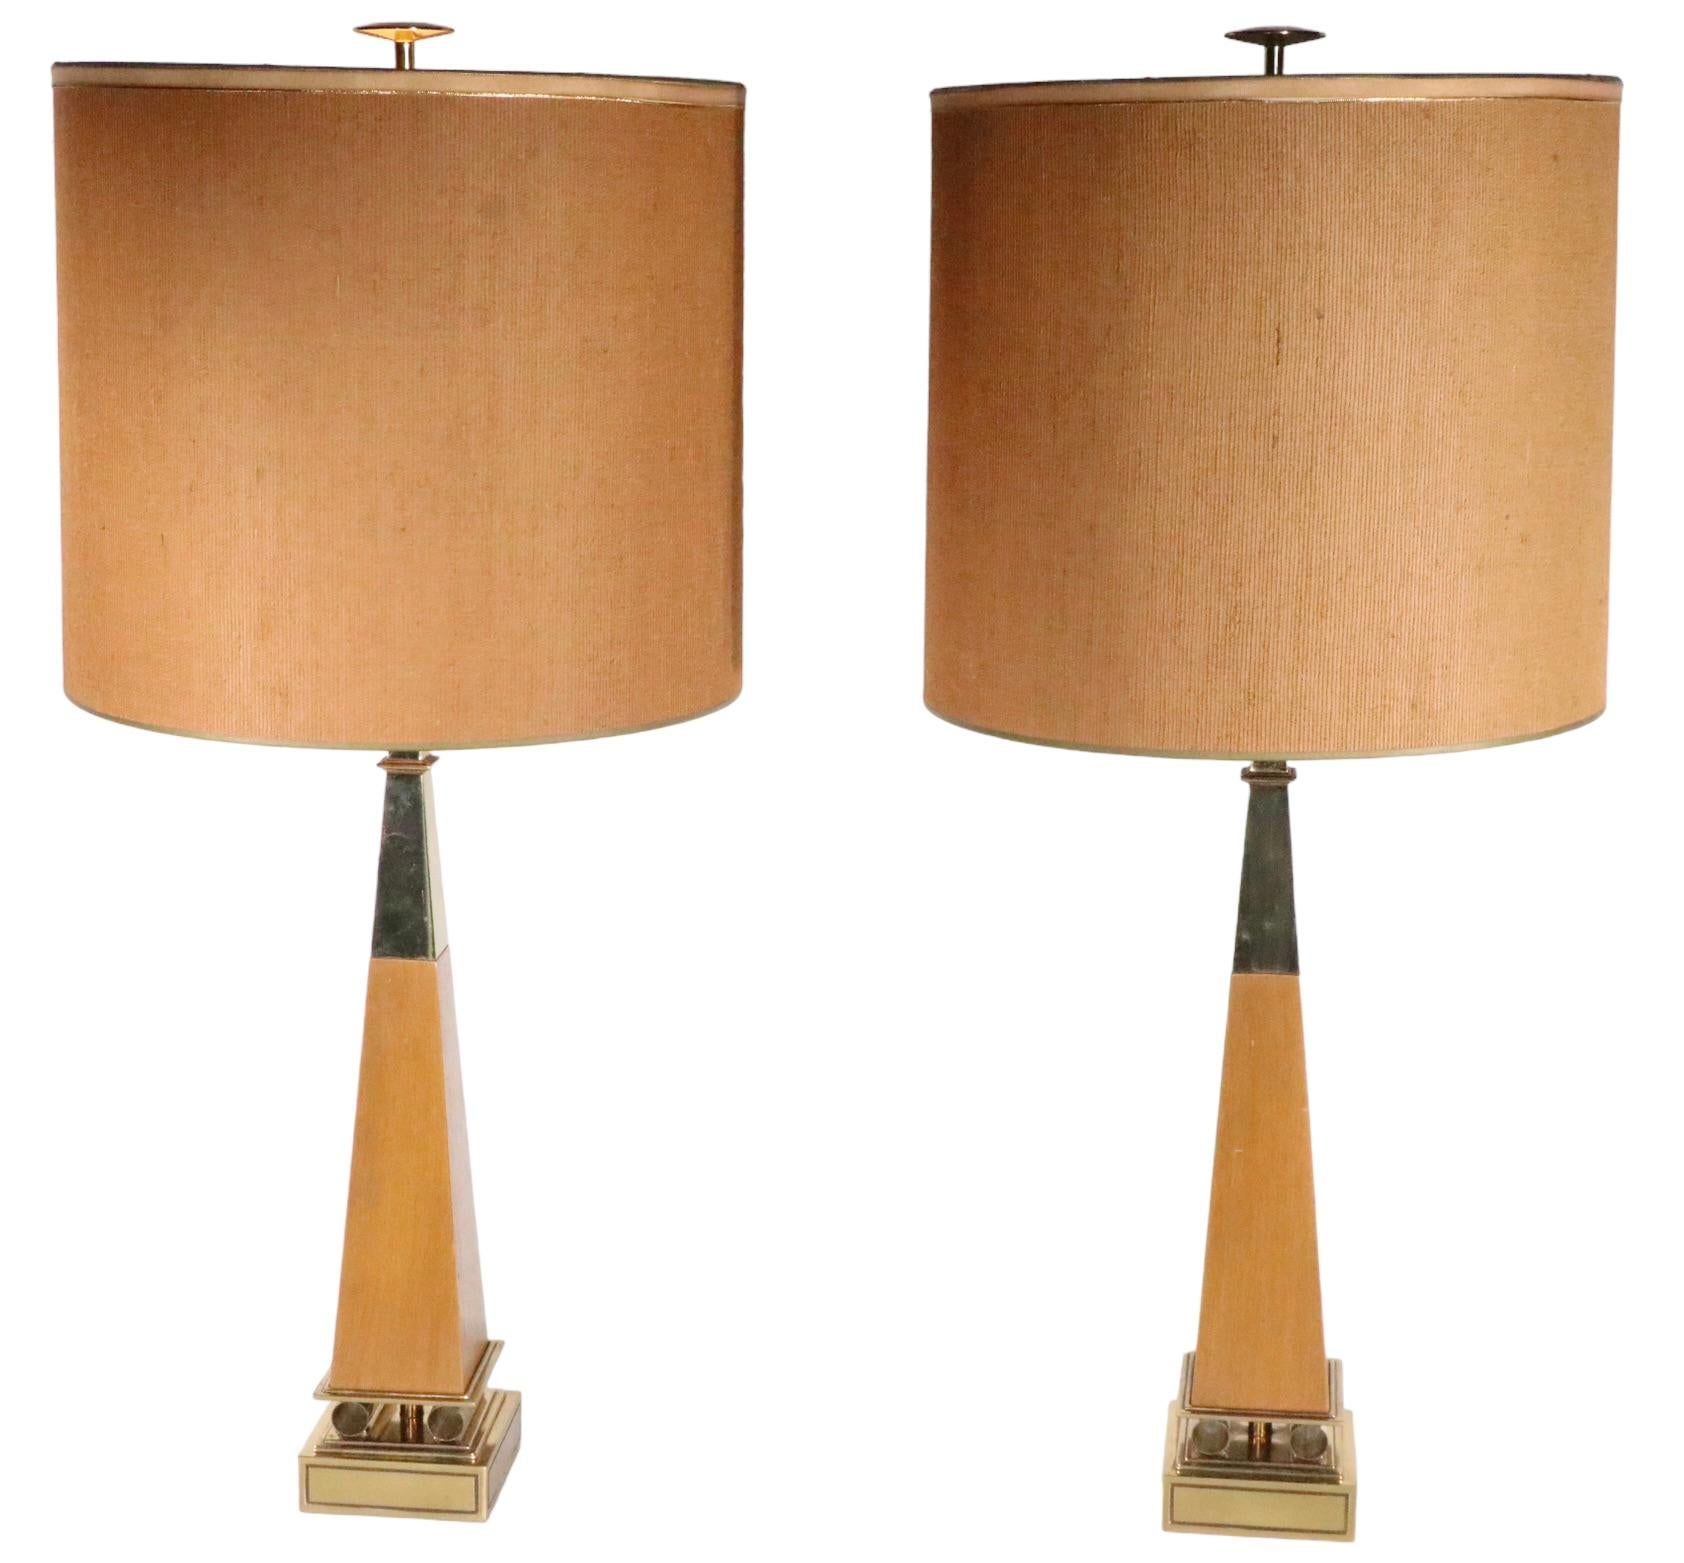 Pair Hollywood Regency Obelisk Table Lamps by Stiffel Att. to Parzinger For Sale 4